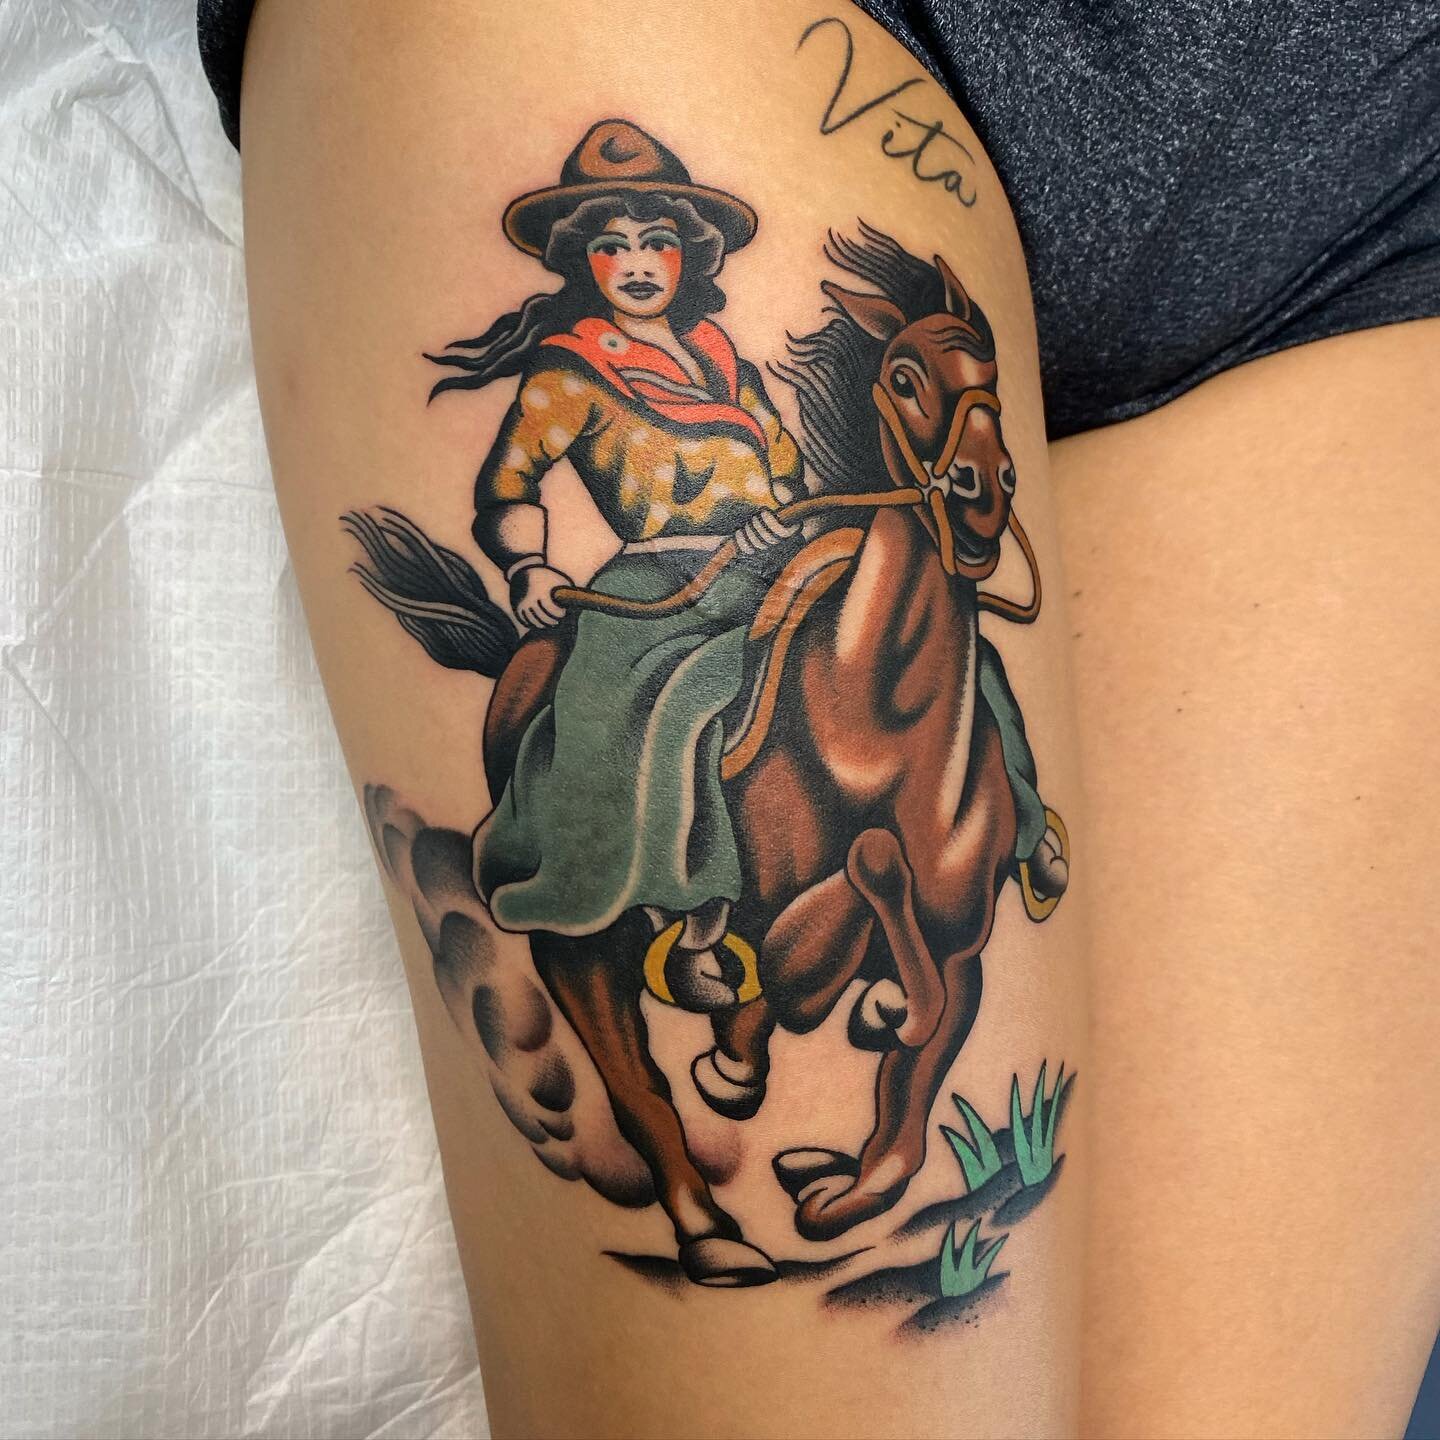 My American traditional Ellie tattoo! Done by Amanda @ Downtown